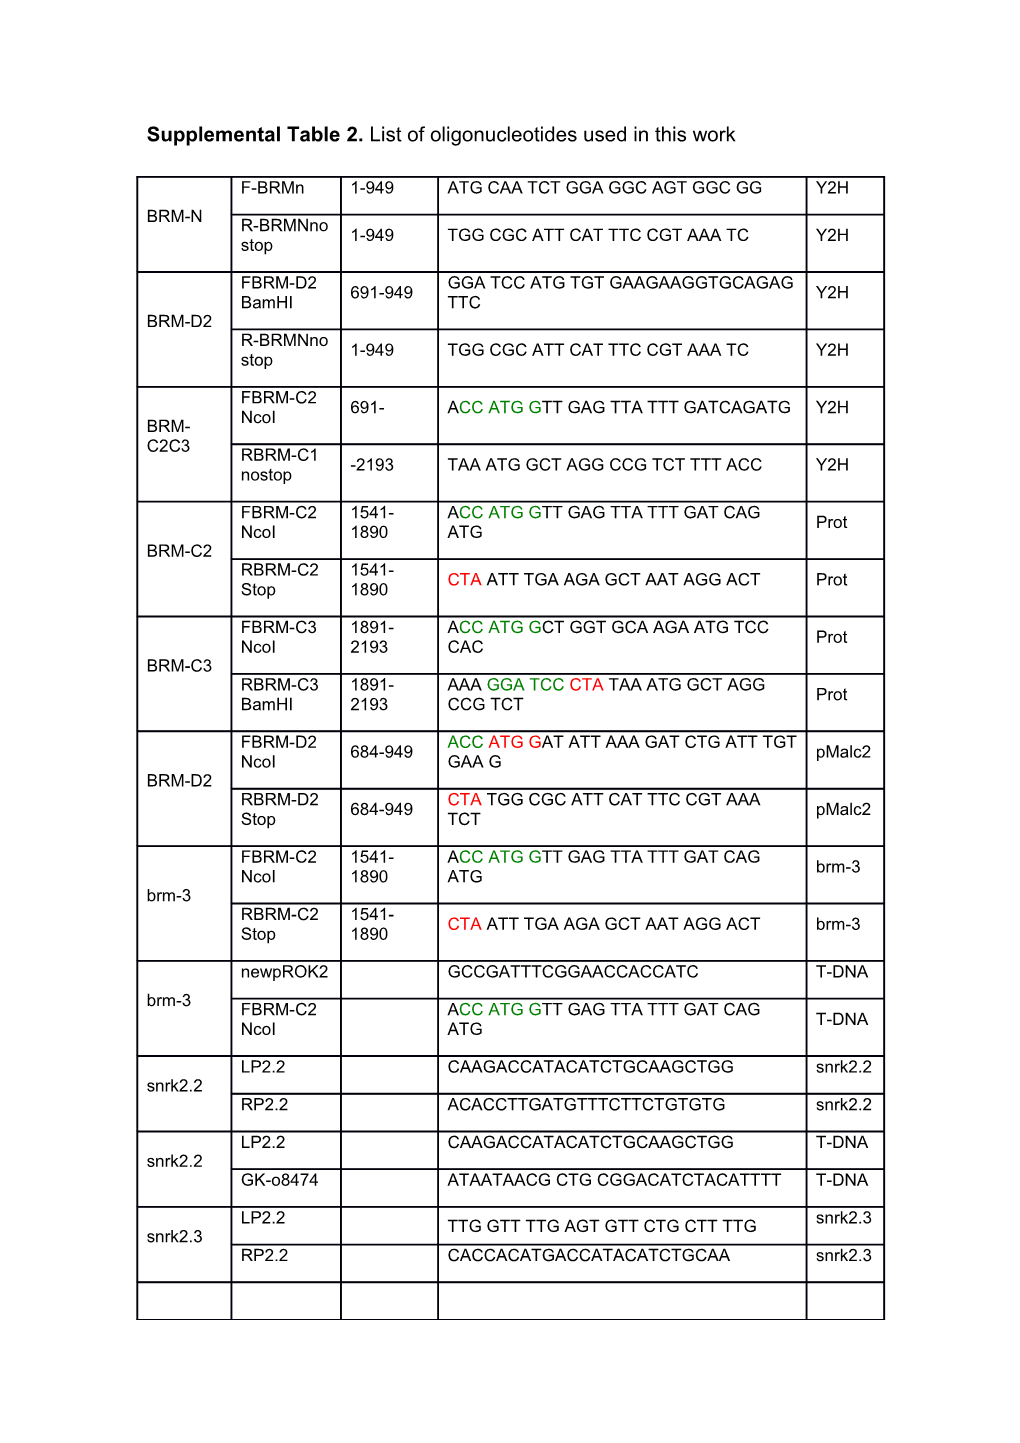 Supplemental Table 2. List of Oligonucleotides Used in This Work